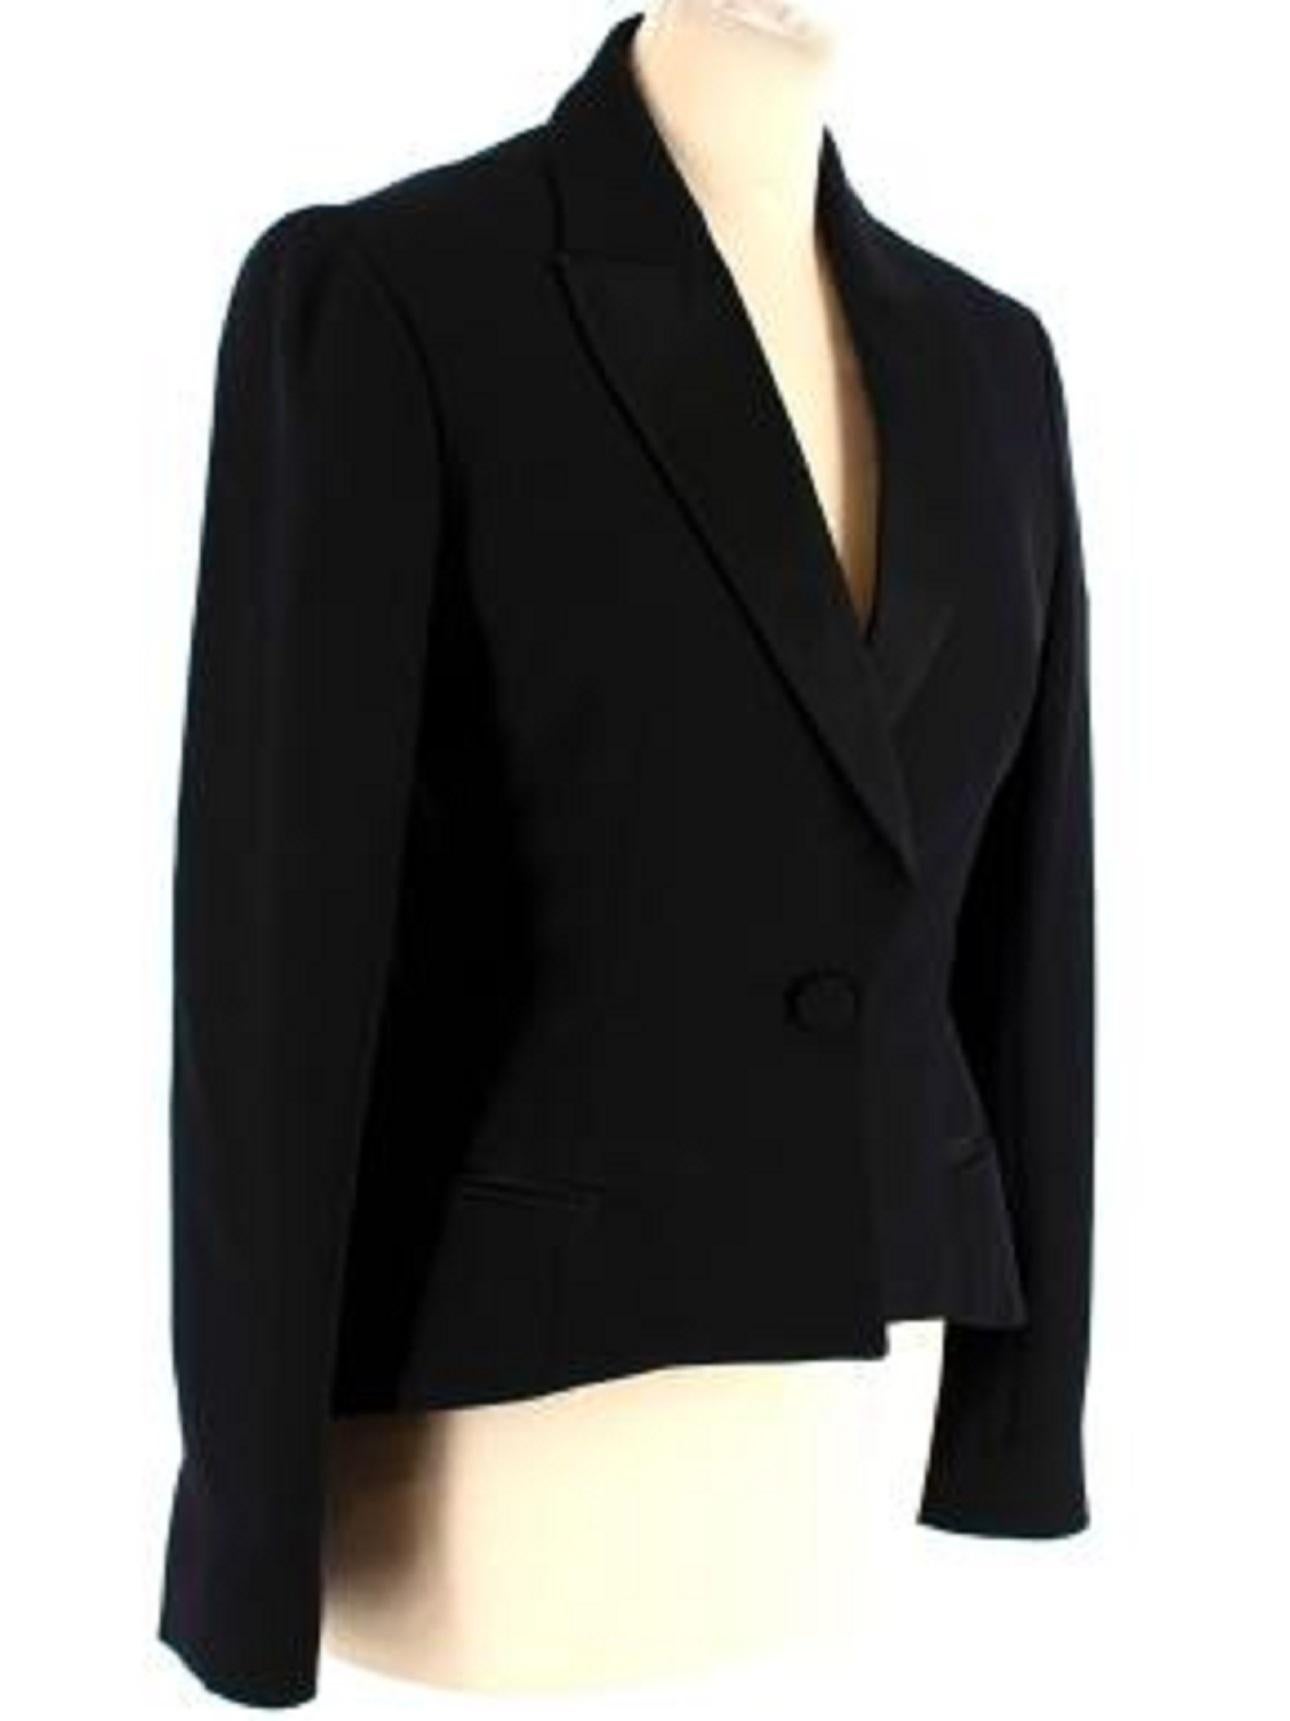 Dior Black Silk Bar Jacket In Good Condition For Sale In London, GB